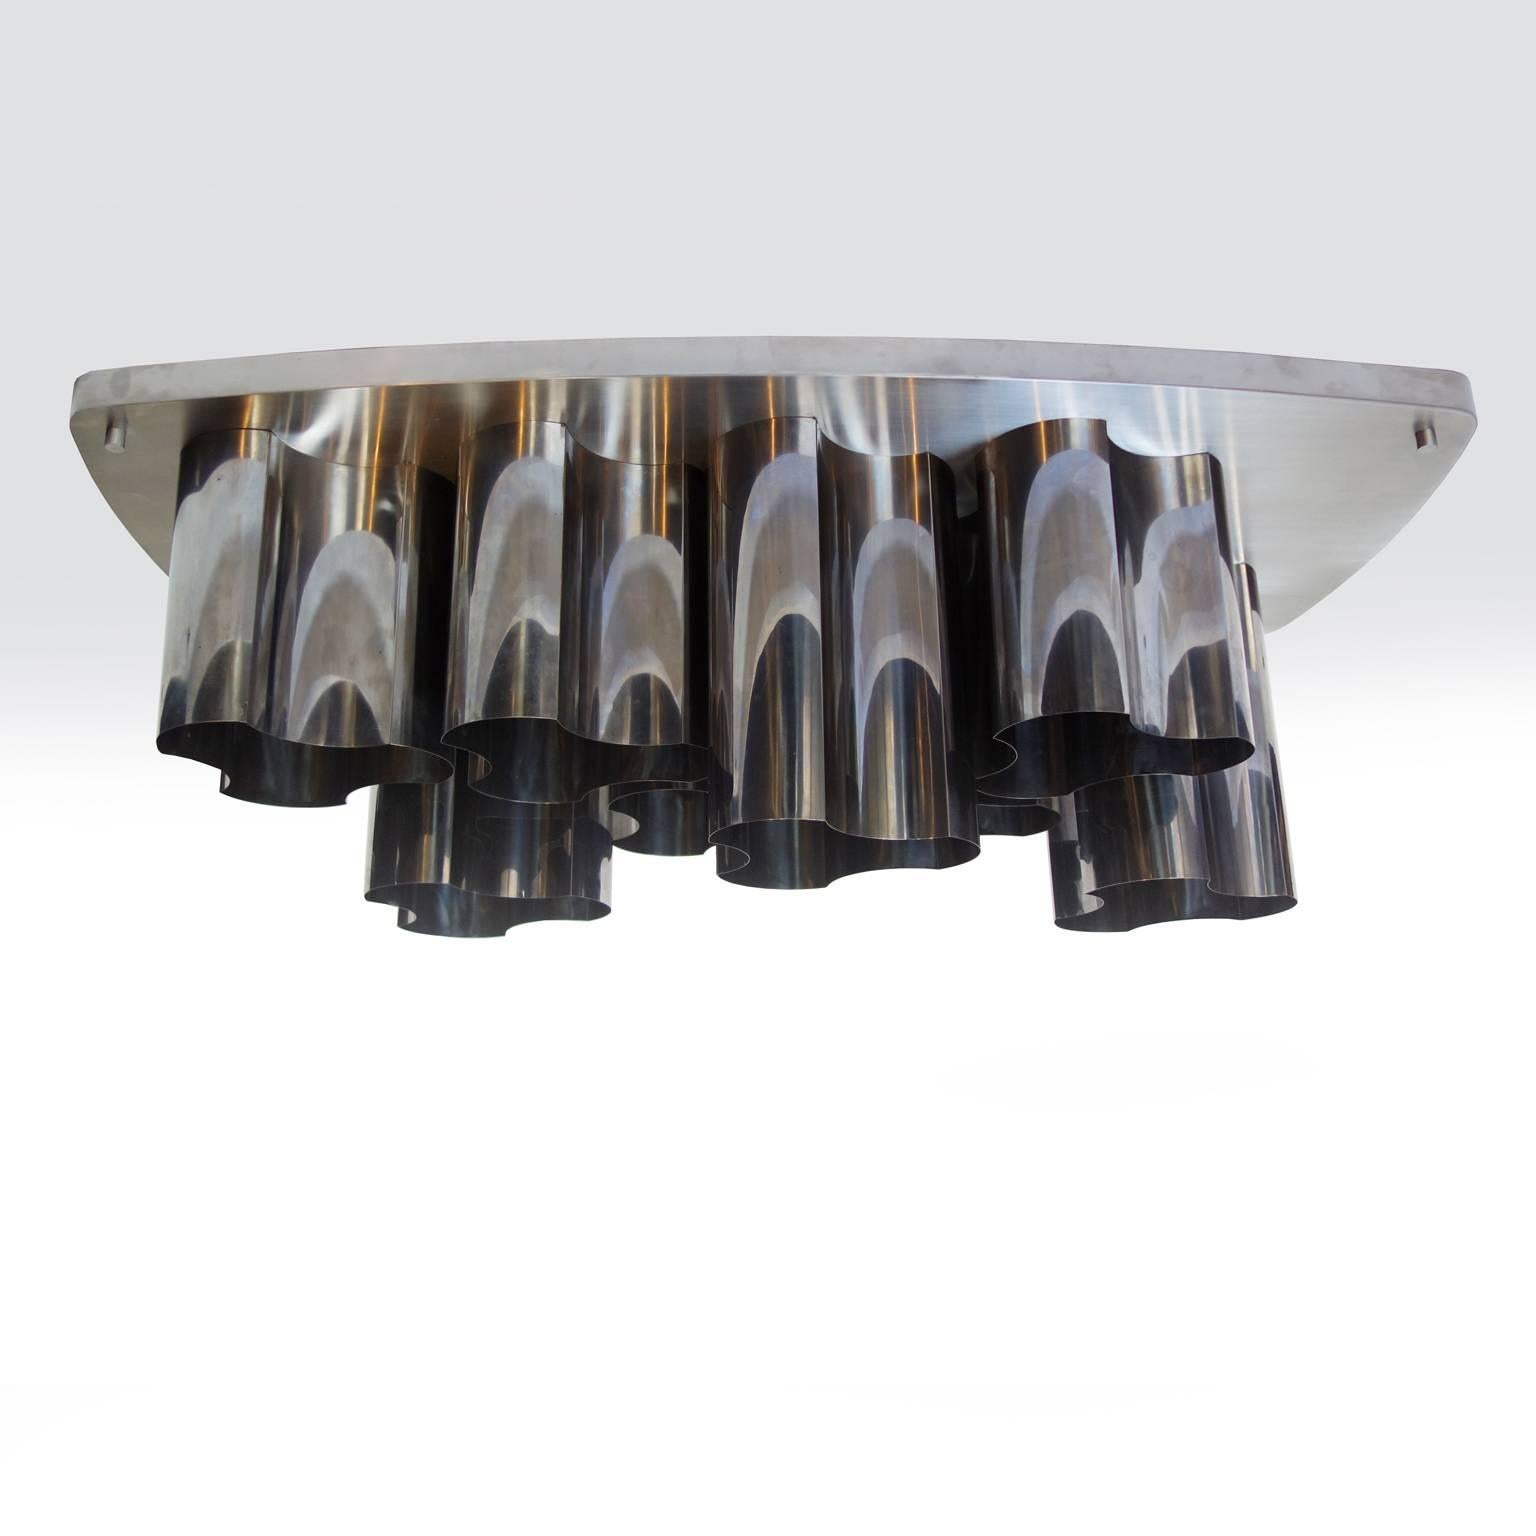 Aluminum ceiling fixture composed of eight modules on a brushed steel base.